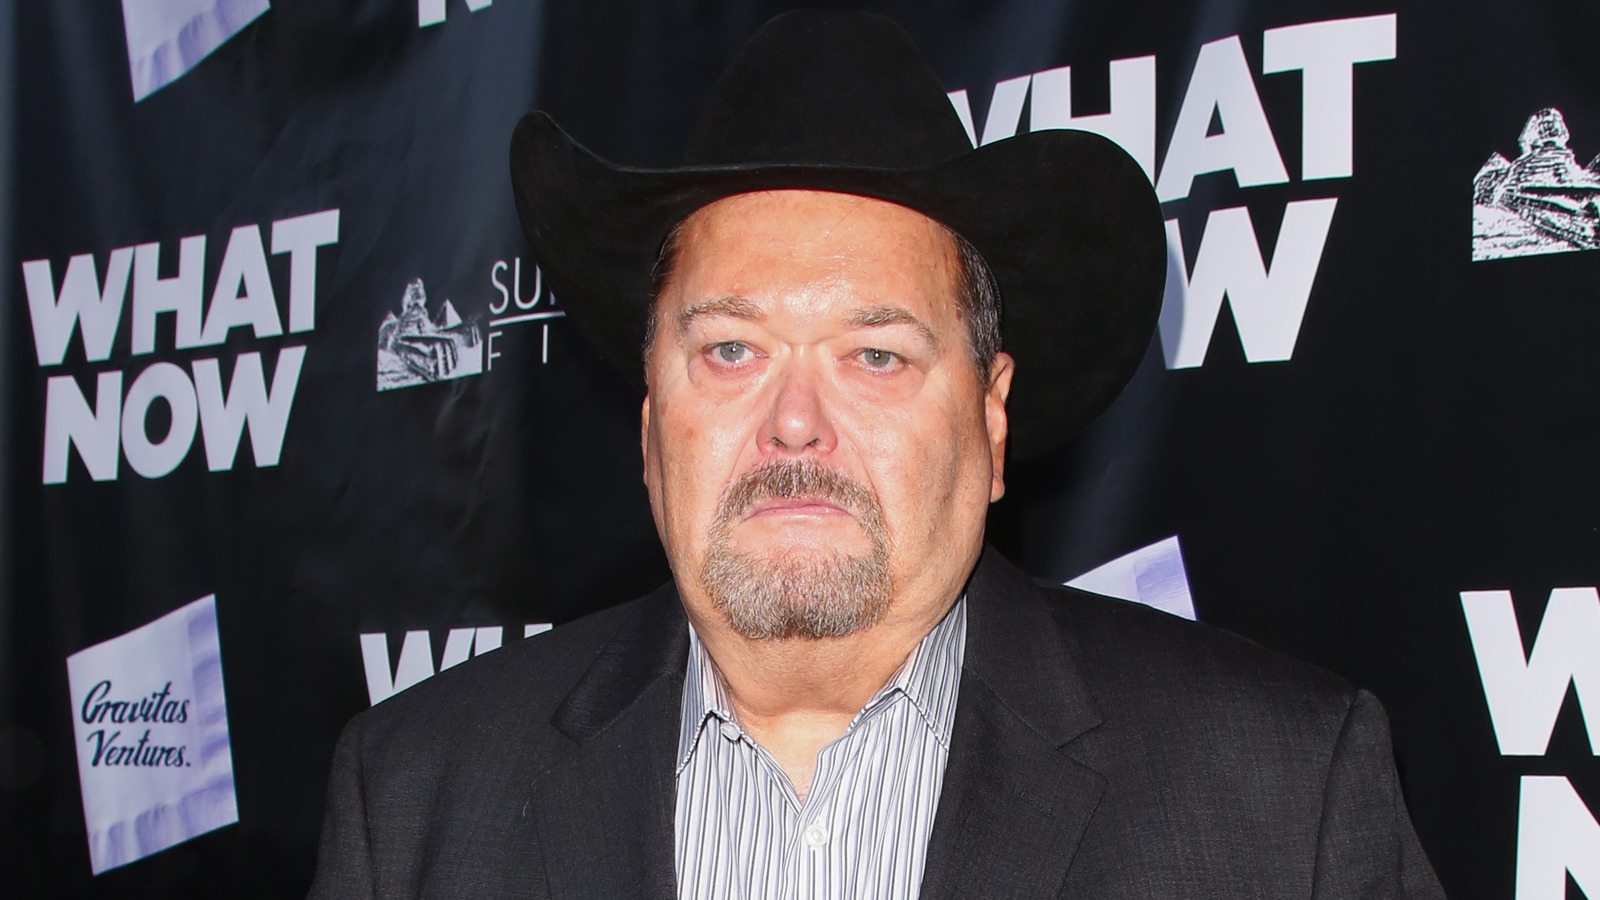 New Book By Former WWE, Current AEW Commentator Jim Ross Set For May Release